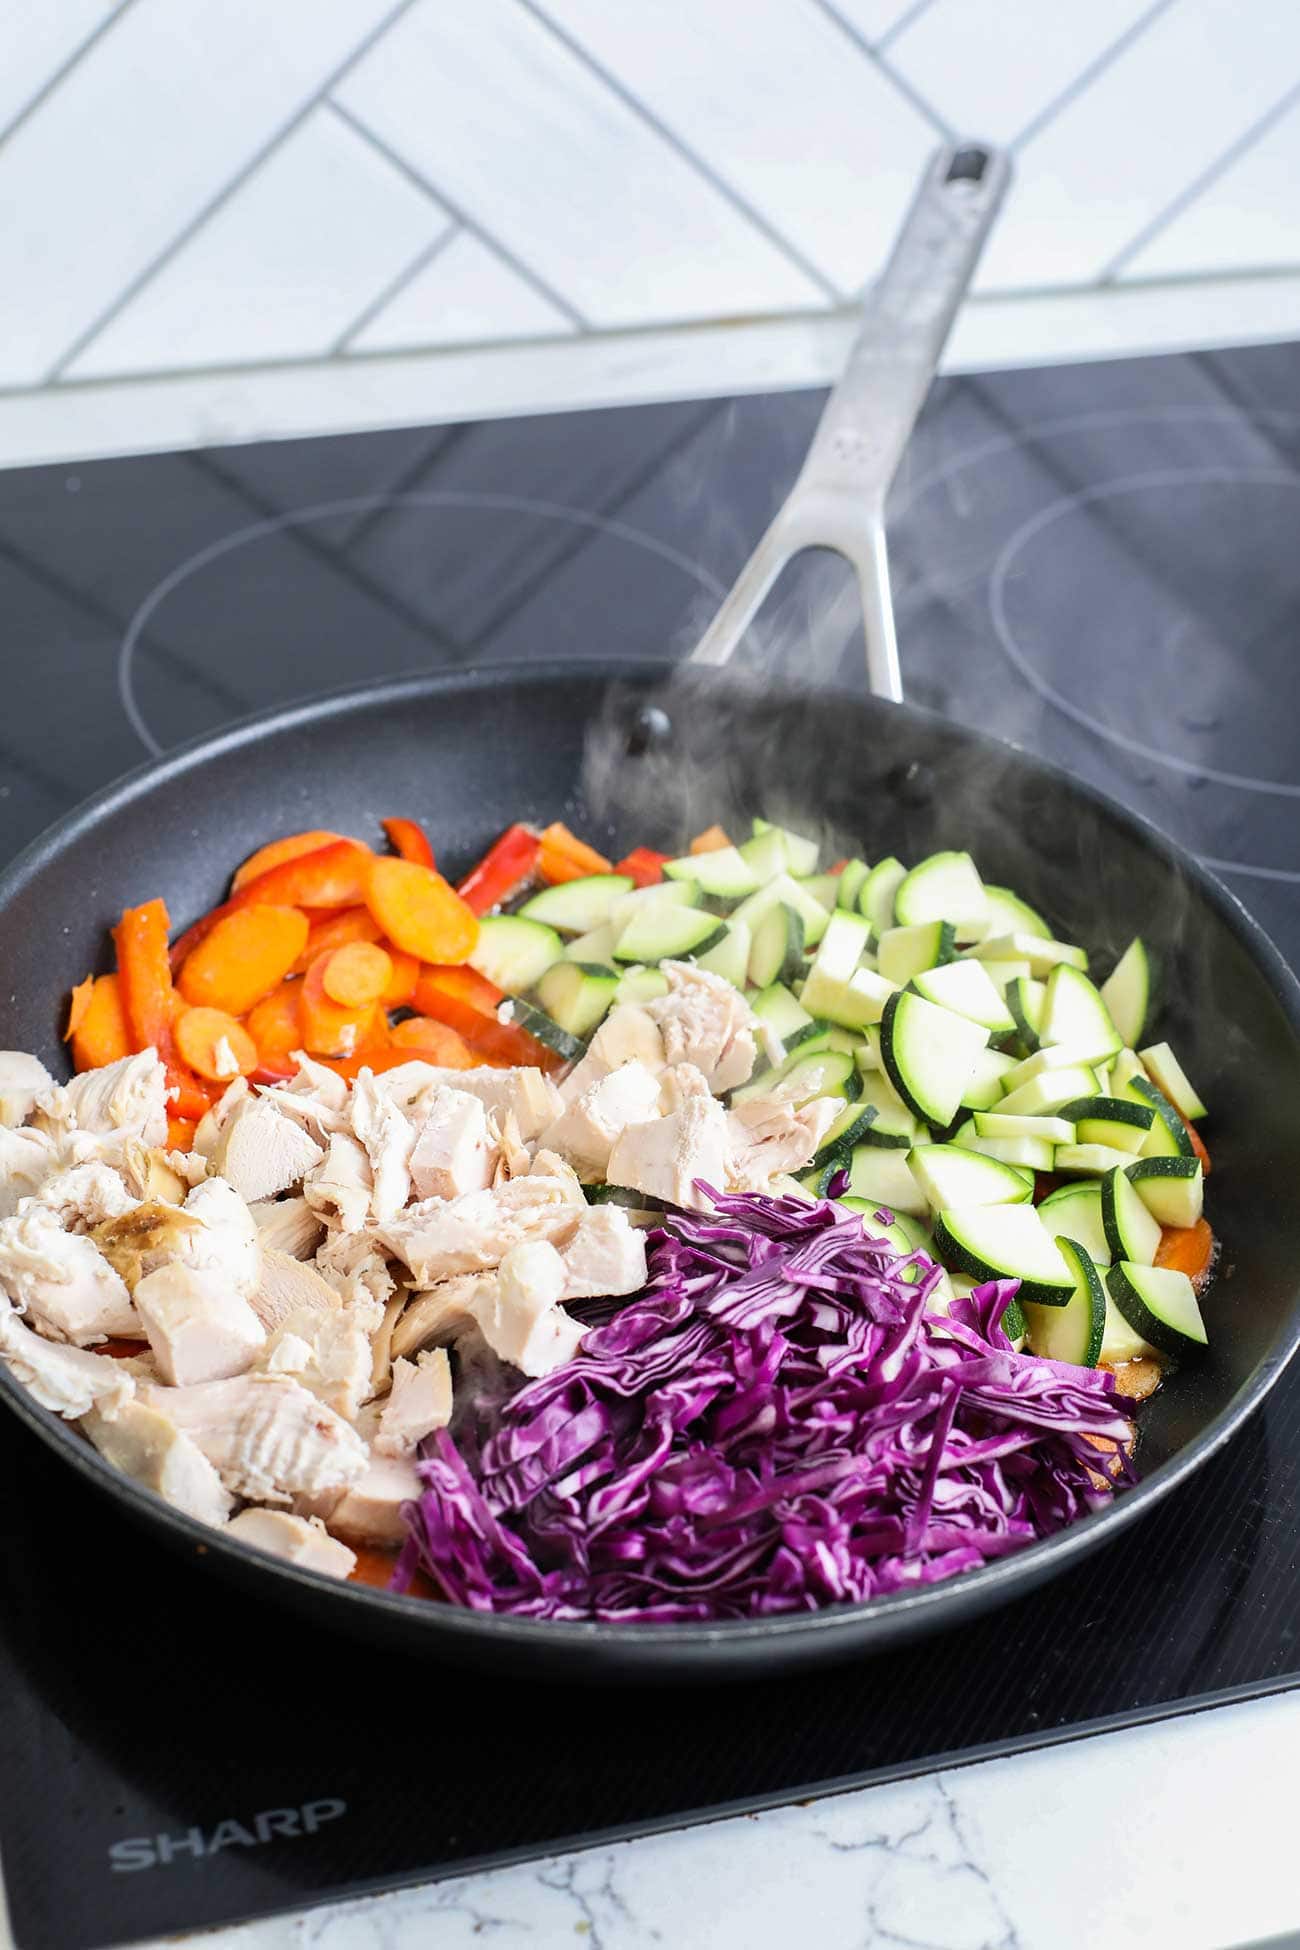 Showing how to stir fry vegetables and heat chicken in a skillet.